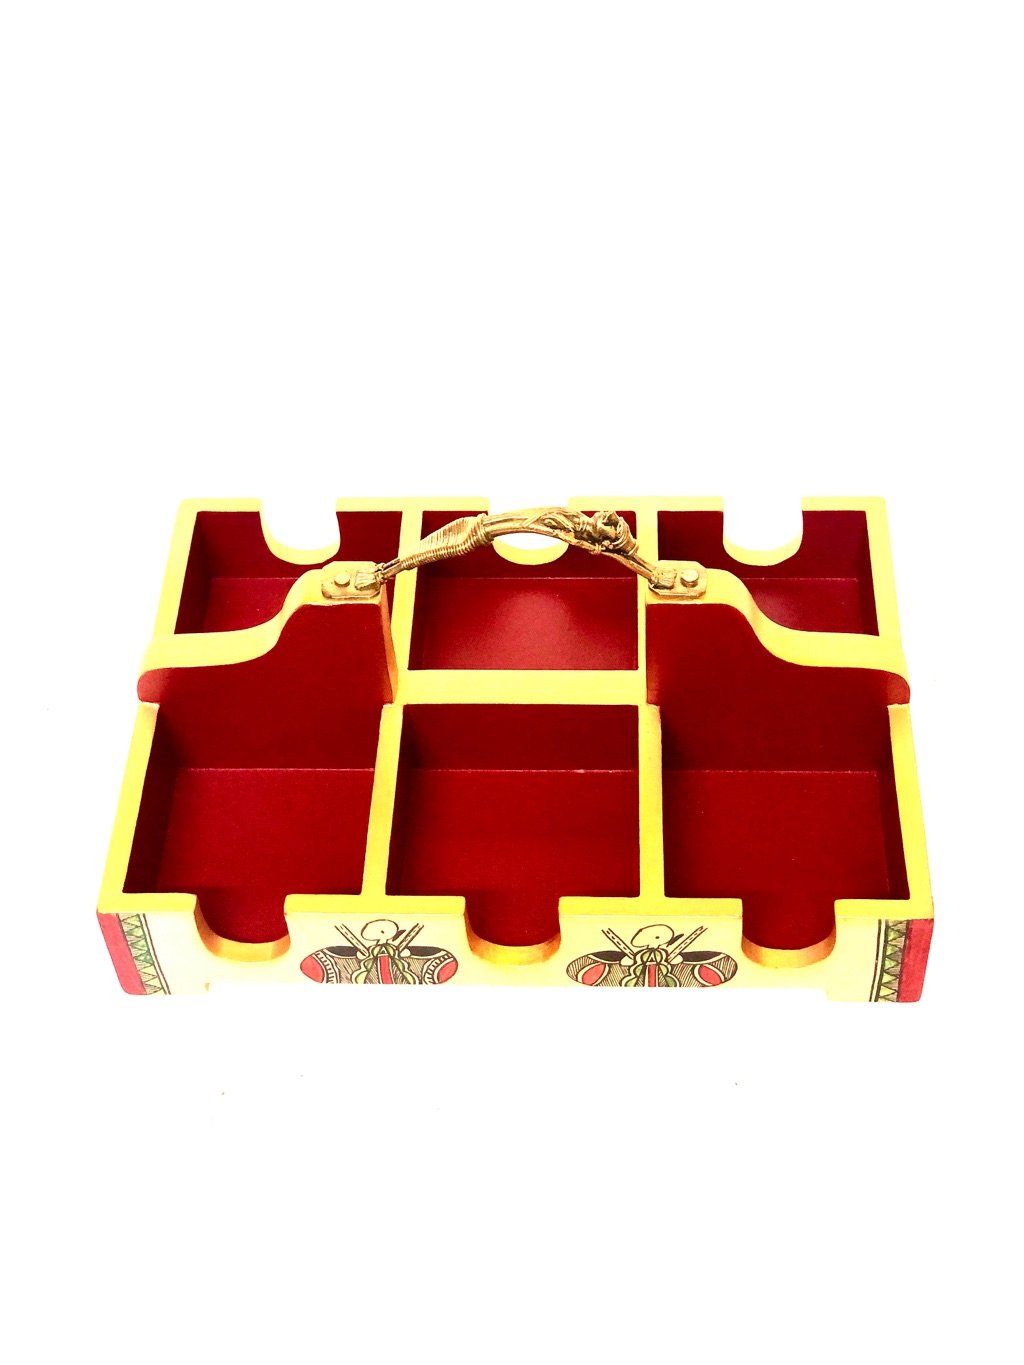 Cup Glass Holder Tray With Partition Painted Acrylic Colors Tamrapatra - Tanariri Hastakala